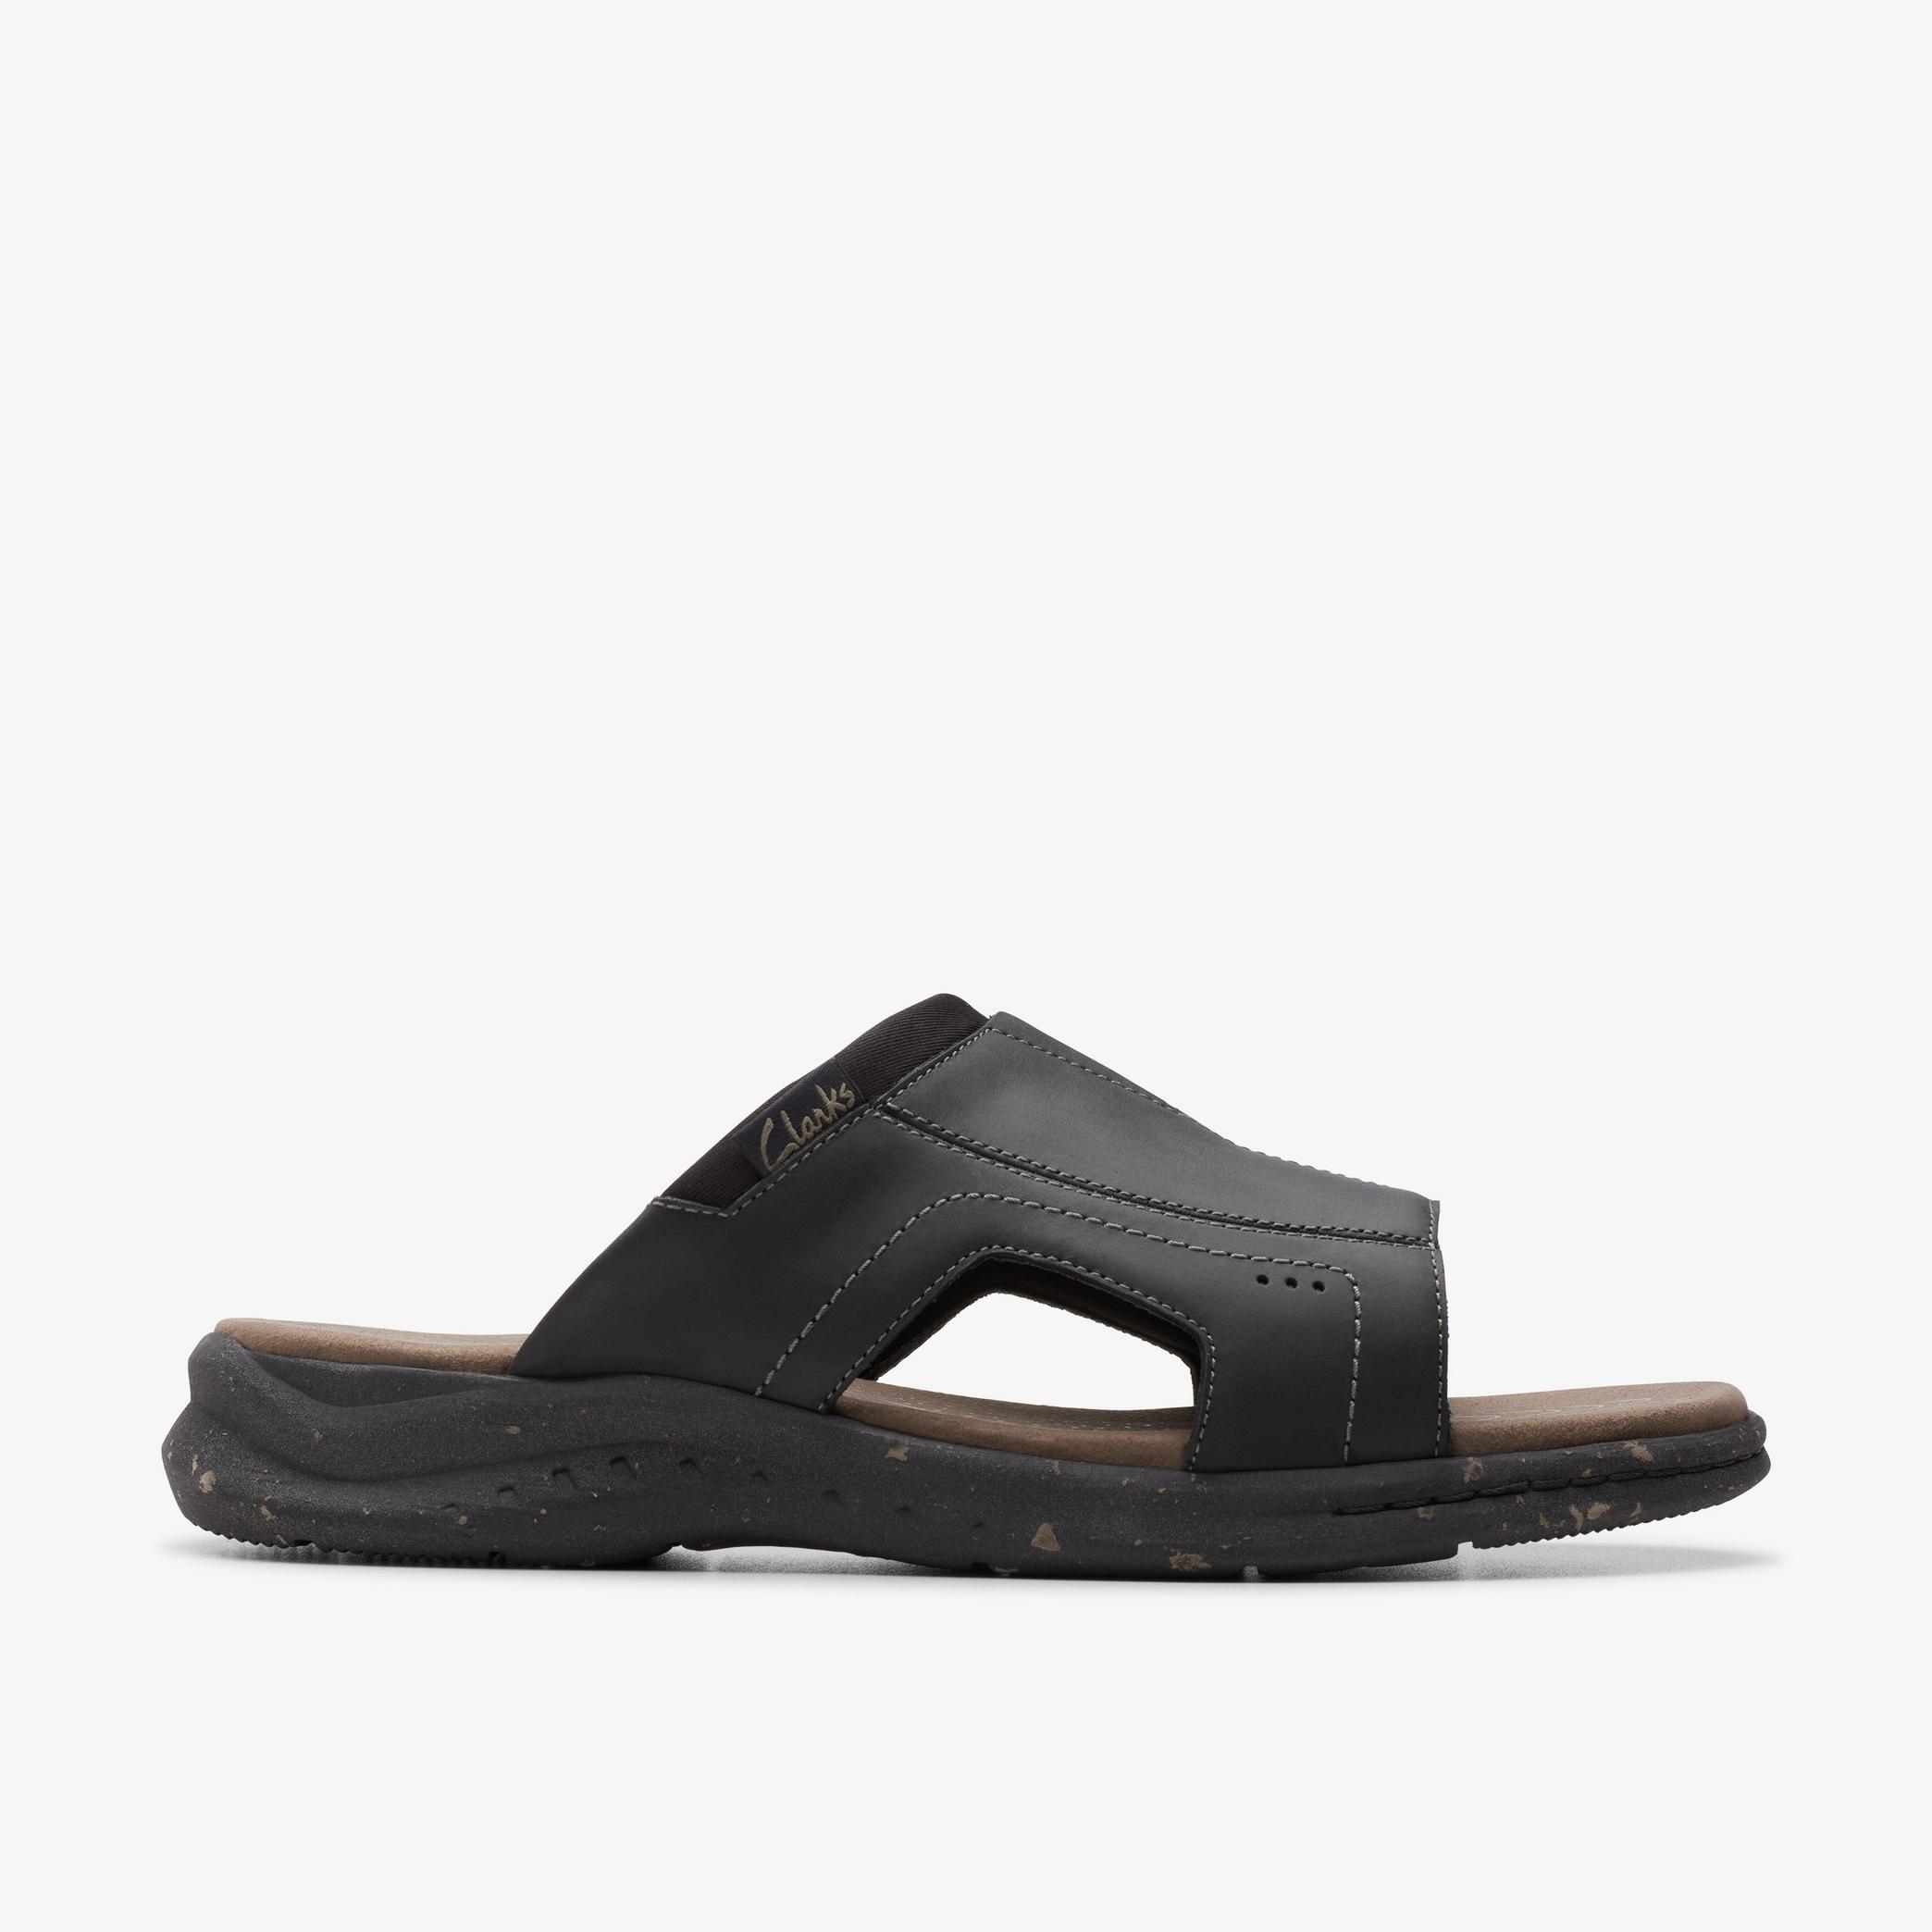 Walkford Band Black Leather Flat Sandals, view 1 of 6